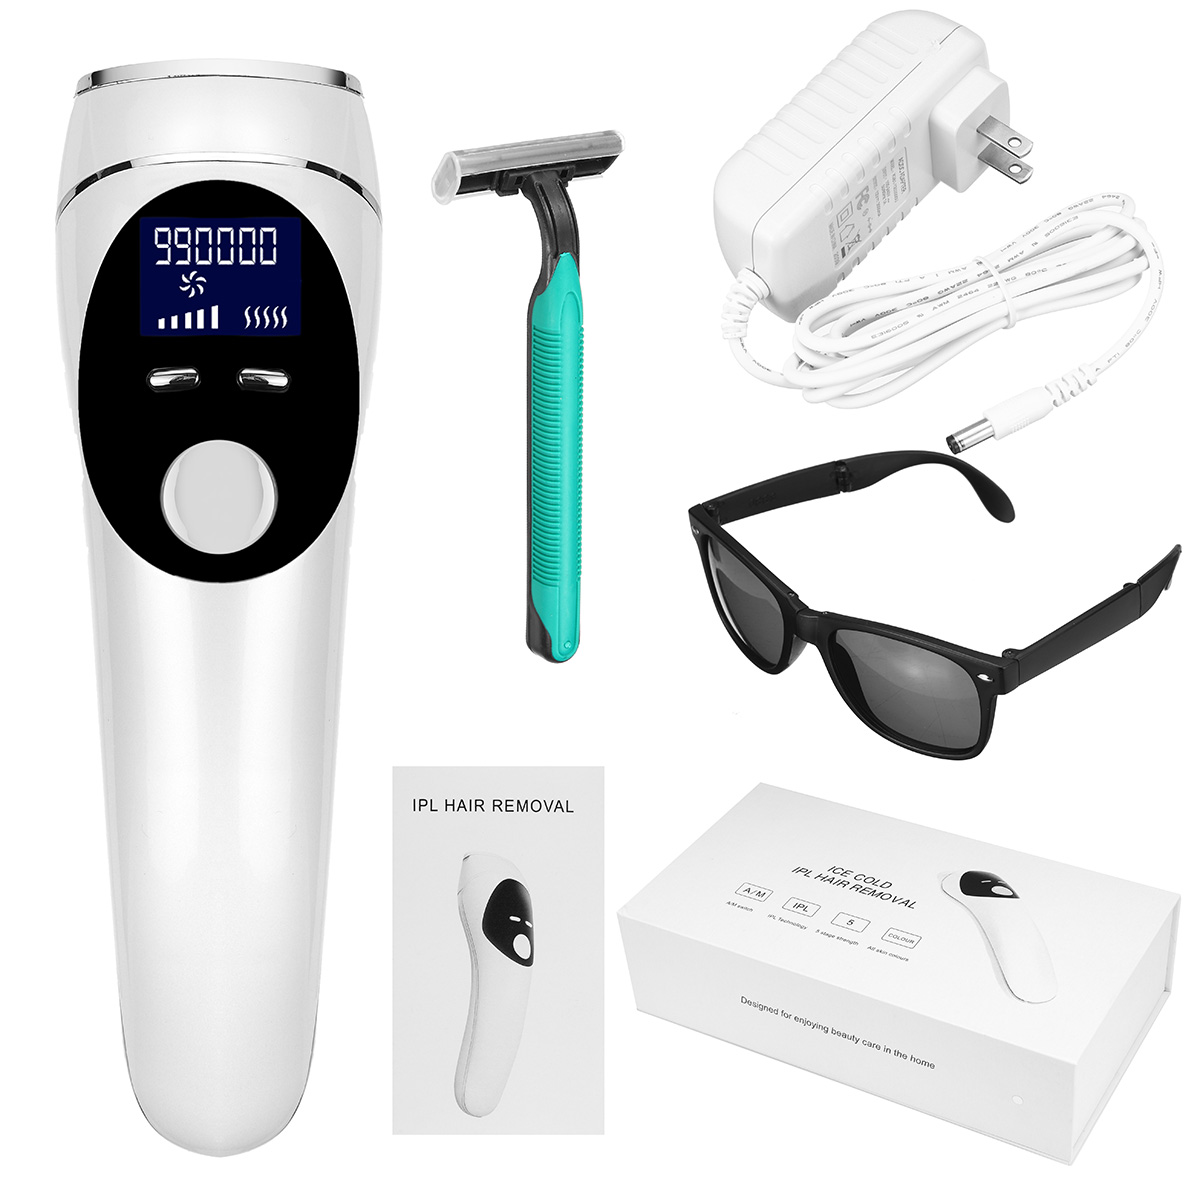 999999-Flashes-DIY-IPL-Laser-Hair-Removal-Device-5-Levels-Painless-Epilator-Hair-Remover-1837621-12